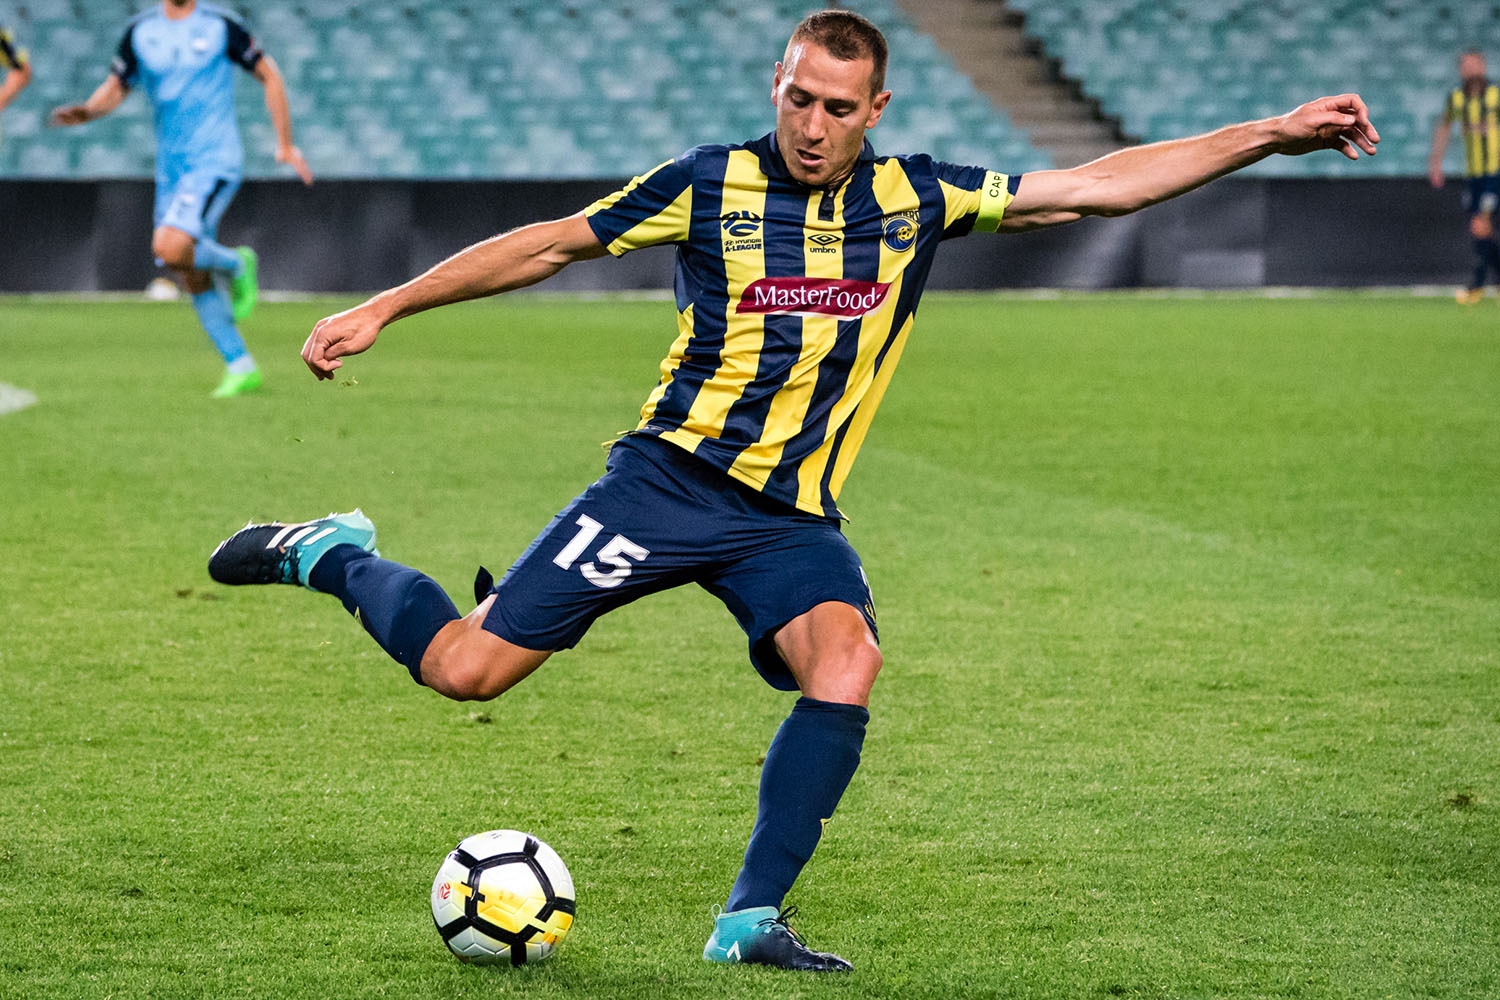 Централ кост ньюкасл джетс. Ньюкасл Джетс. Сентрал Кост. Central Coast Mariners.